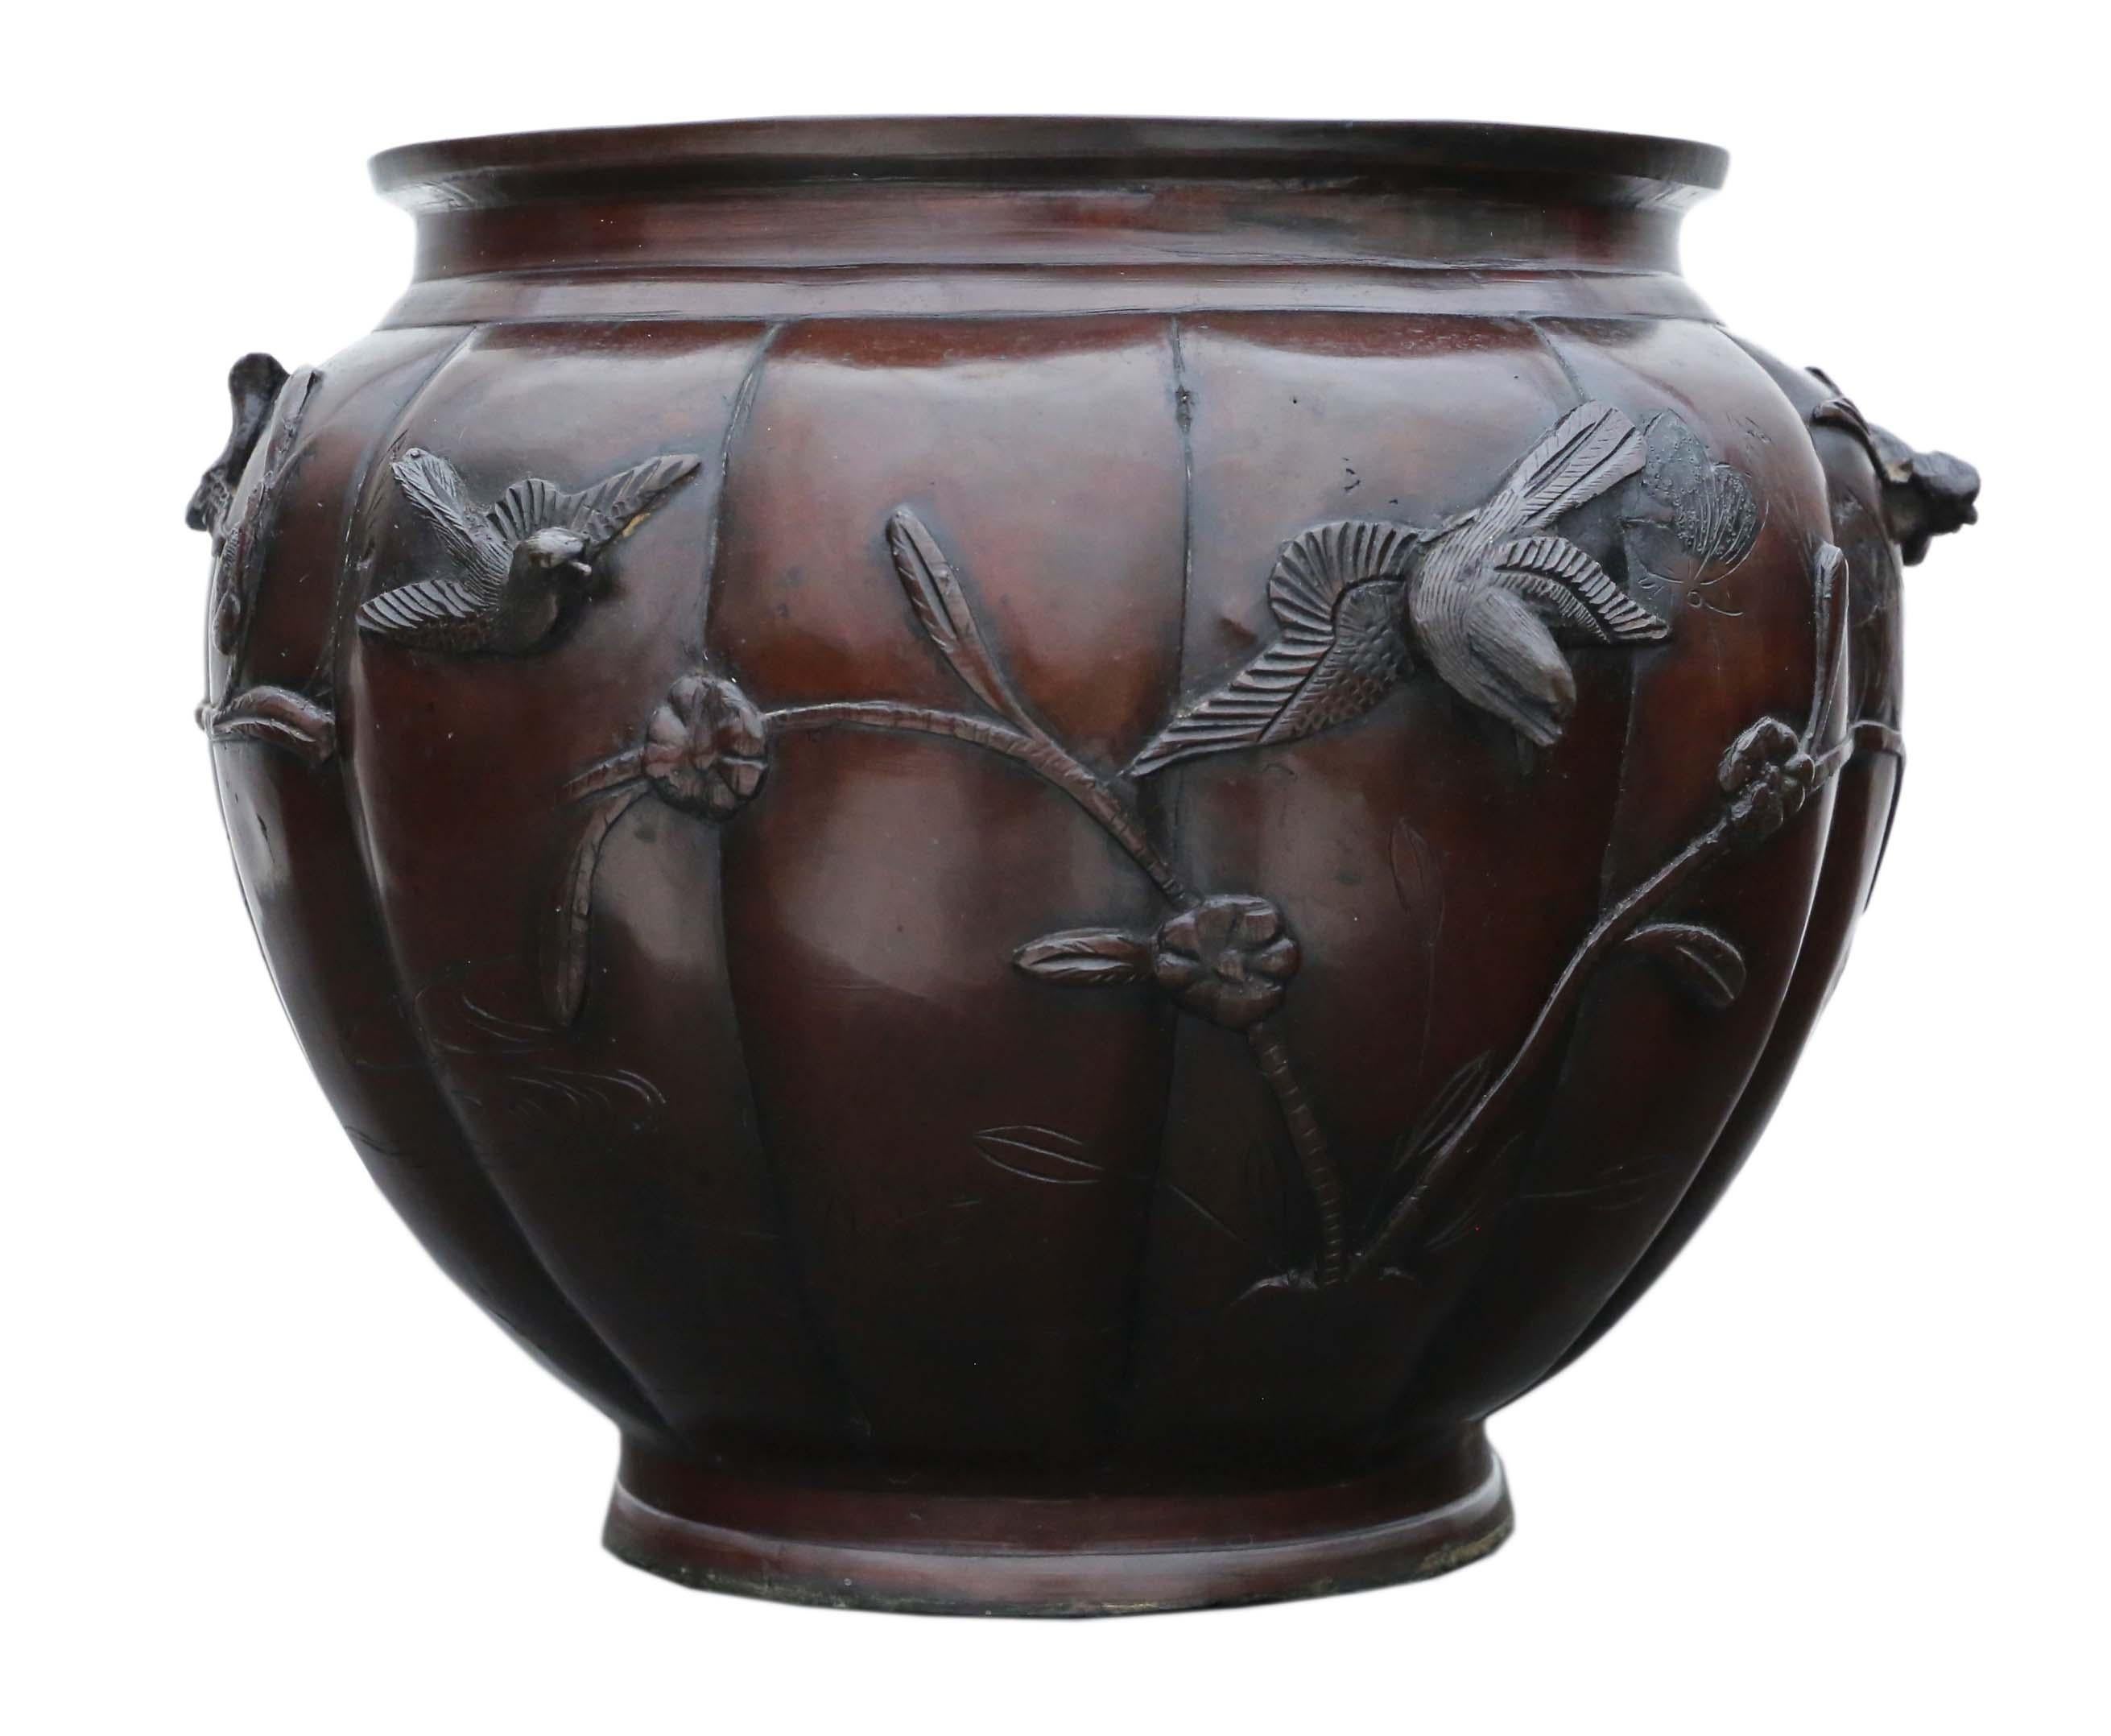 Antique large fine quality Oriental Japanese bronze Jardinière planter bowl censor Meiji Period 19th Century.

Would look amazing in the right location and make a fabulous centre piece. Rare large size and design. Truly exceptional. Great colour